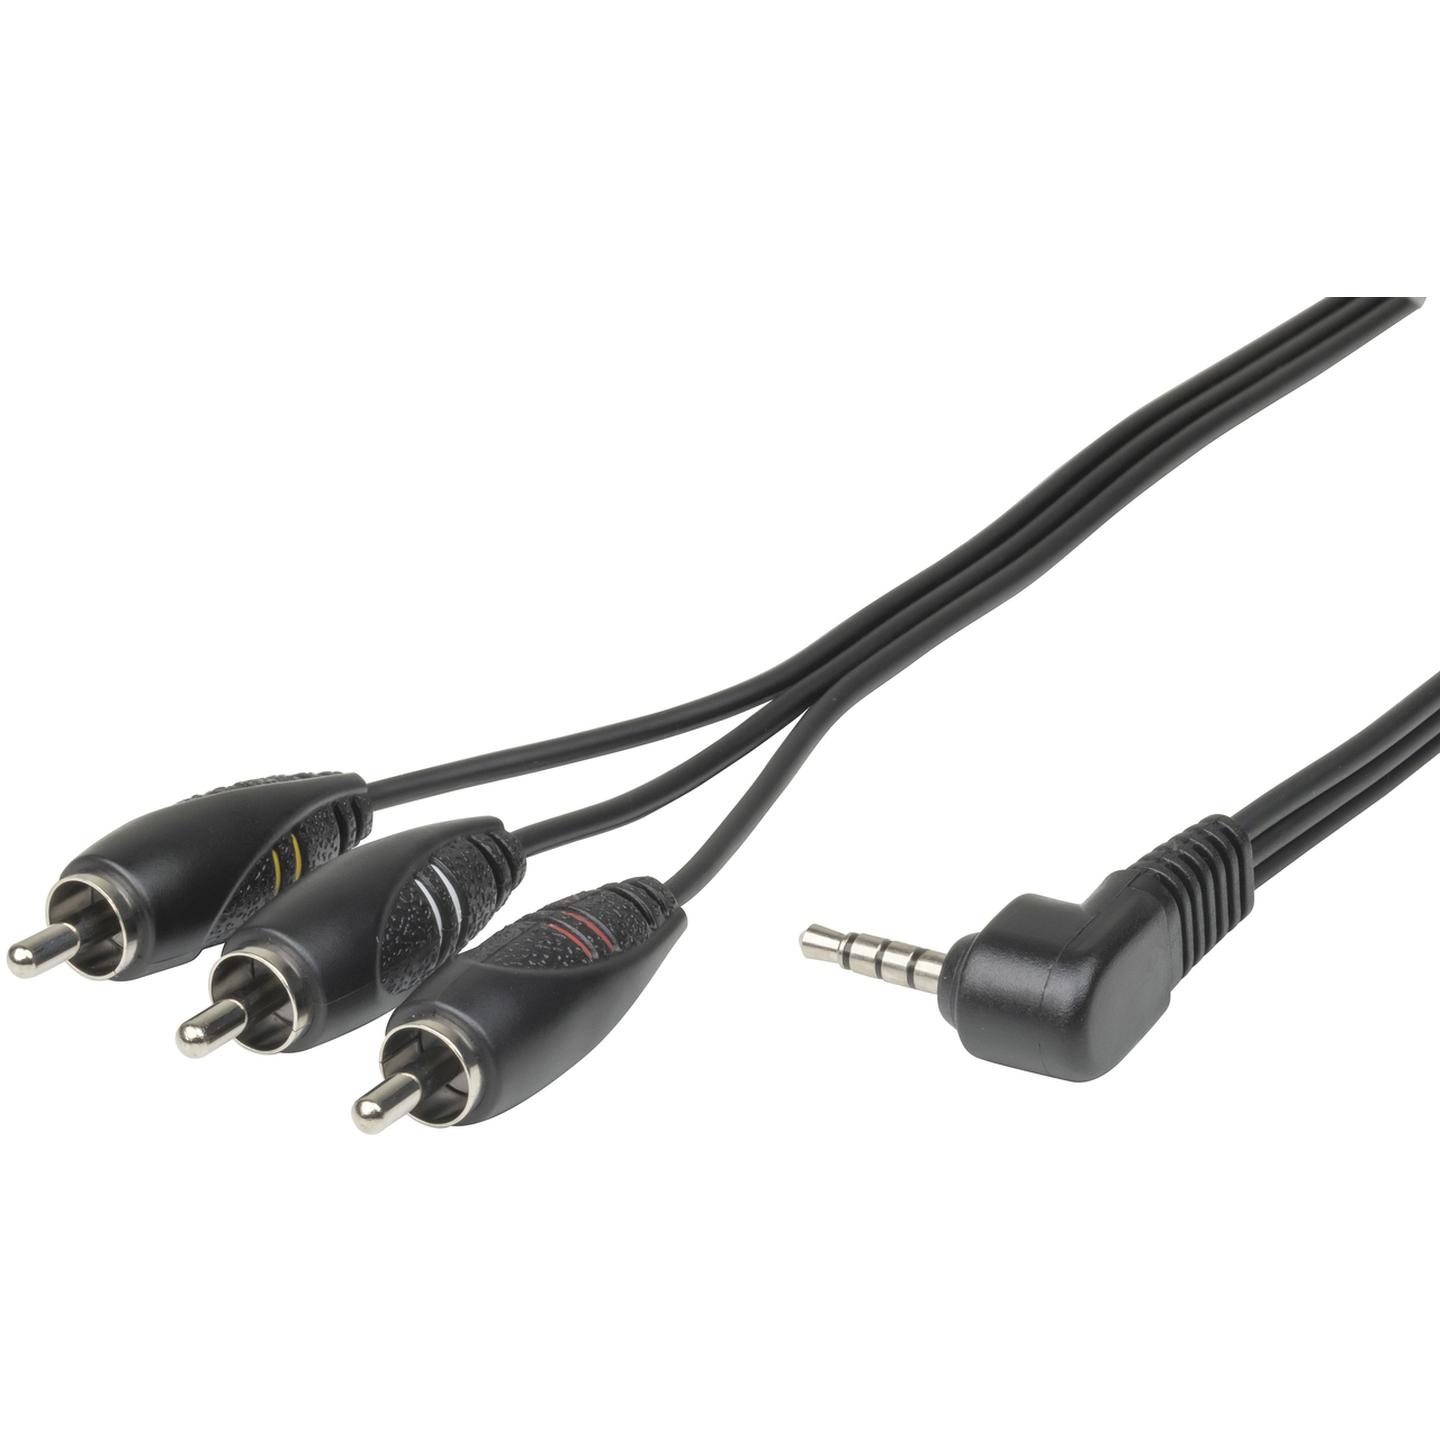 3 x RCA Plugs to 4 Pin 3.5mm AV Cable - 1.5m